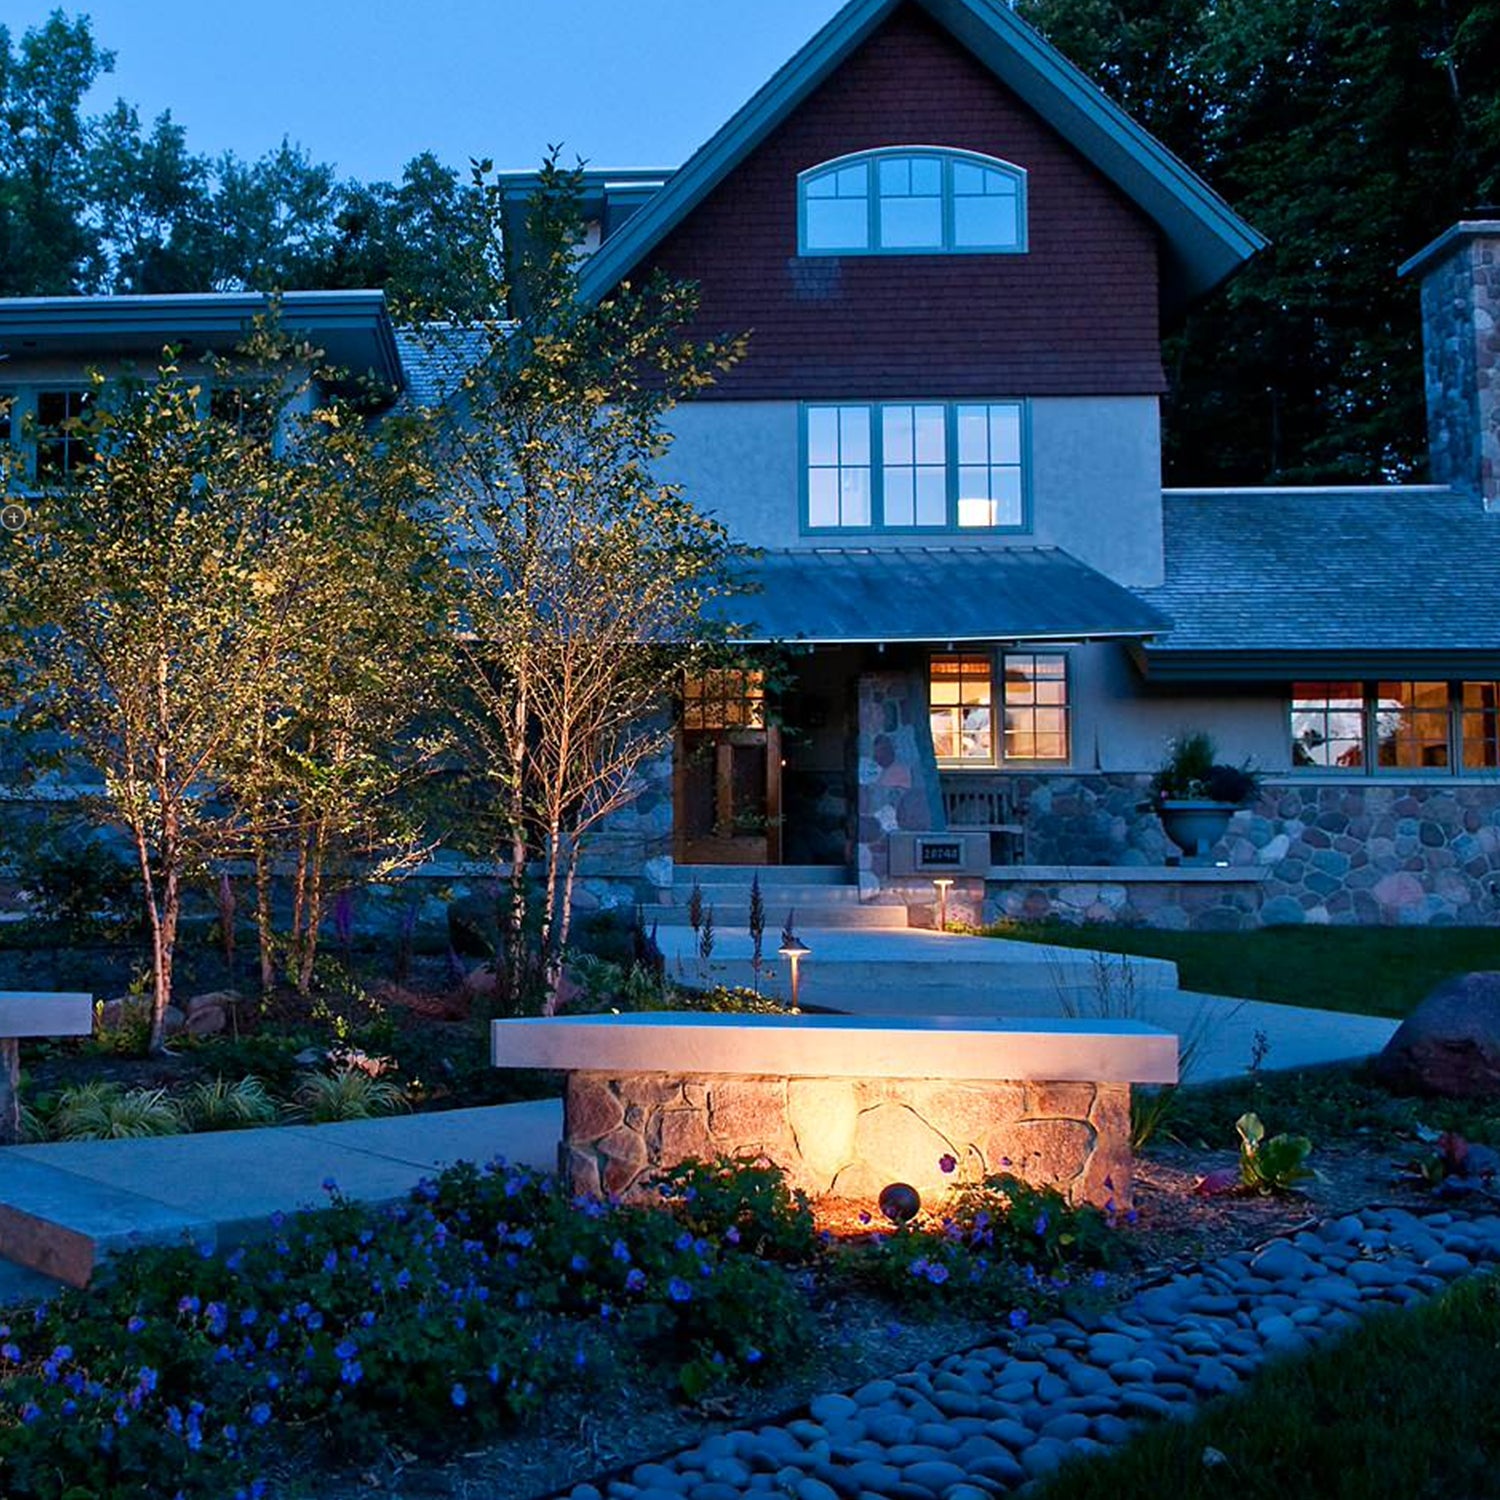 Nighttime landscape illuminated by brass LED flood lights, highlighting a modern house, garden, and architectural features